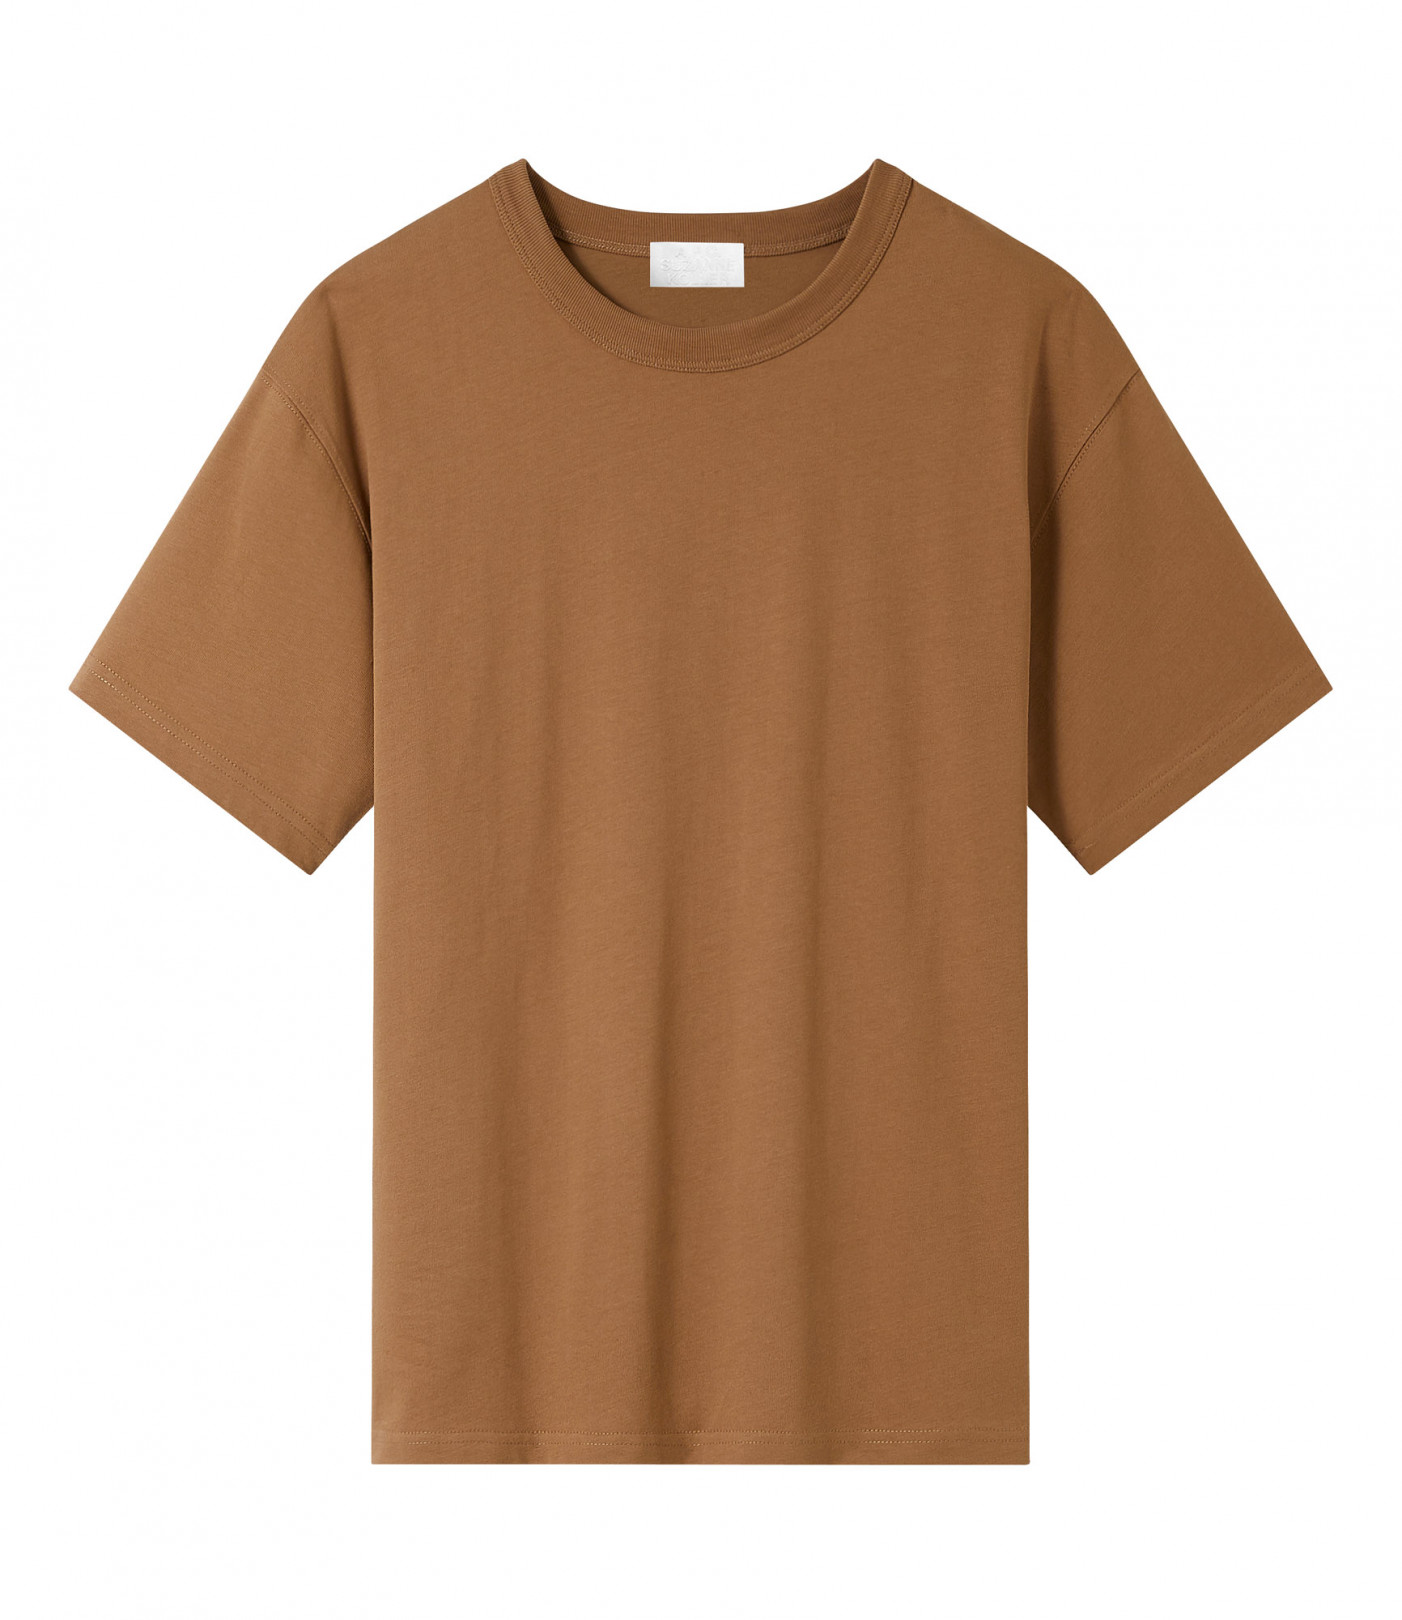 HOMME T-SHIRTS OWEN TABAC 1万6,500円